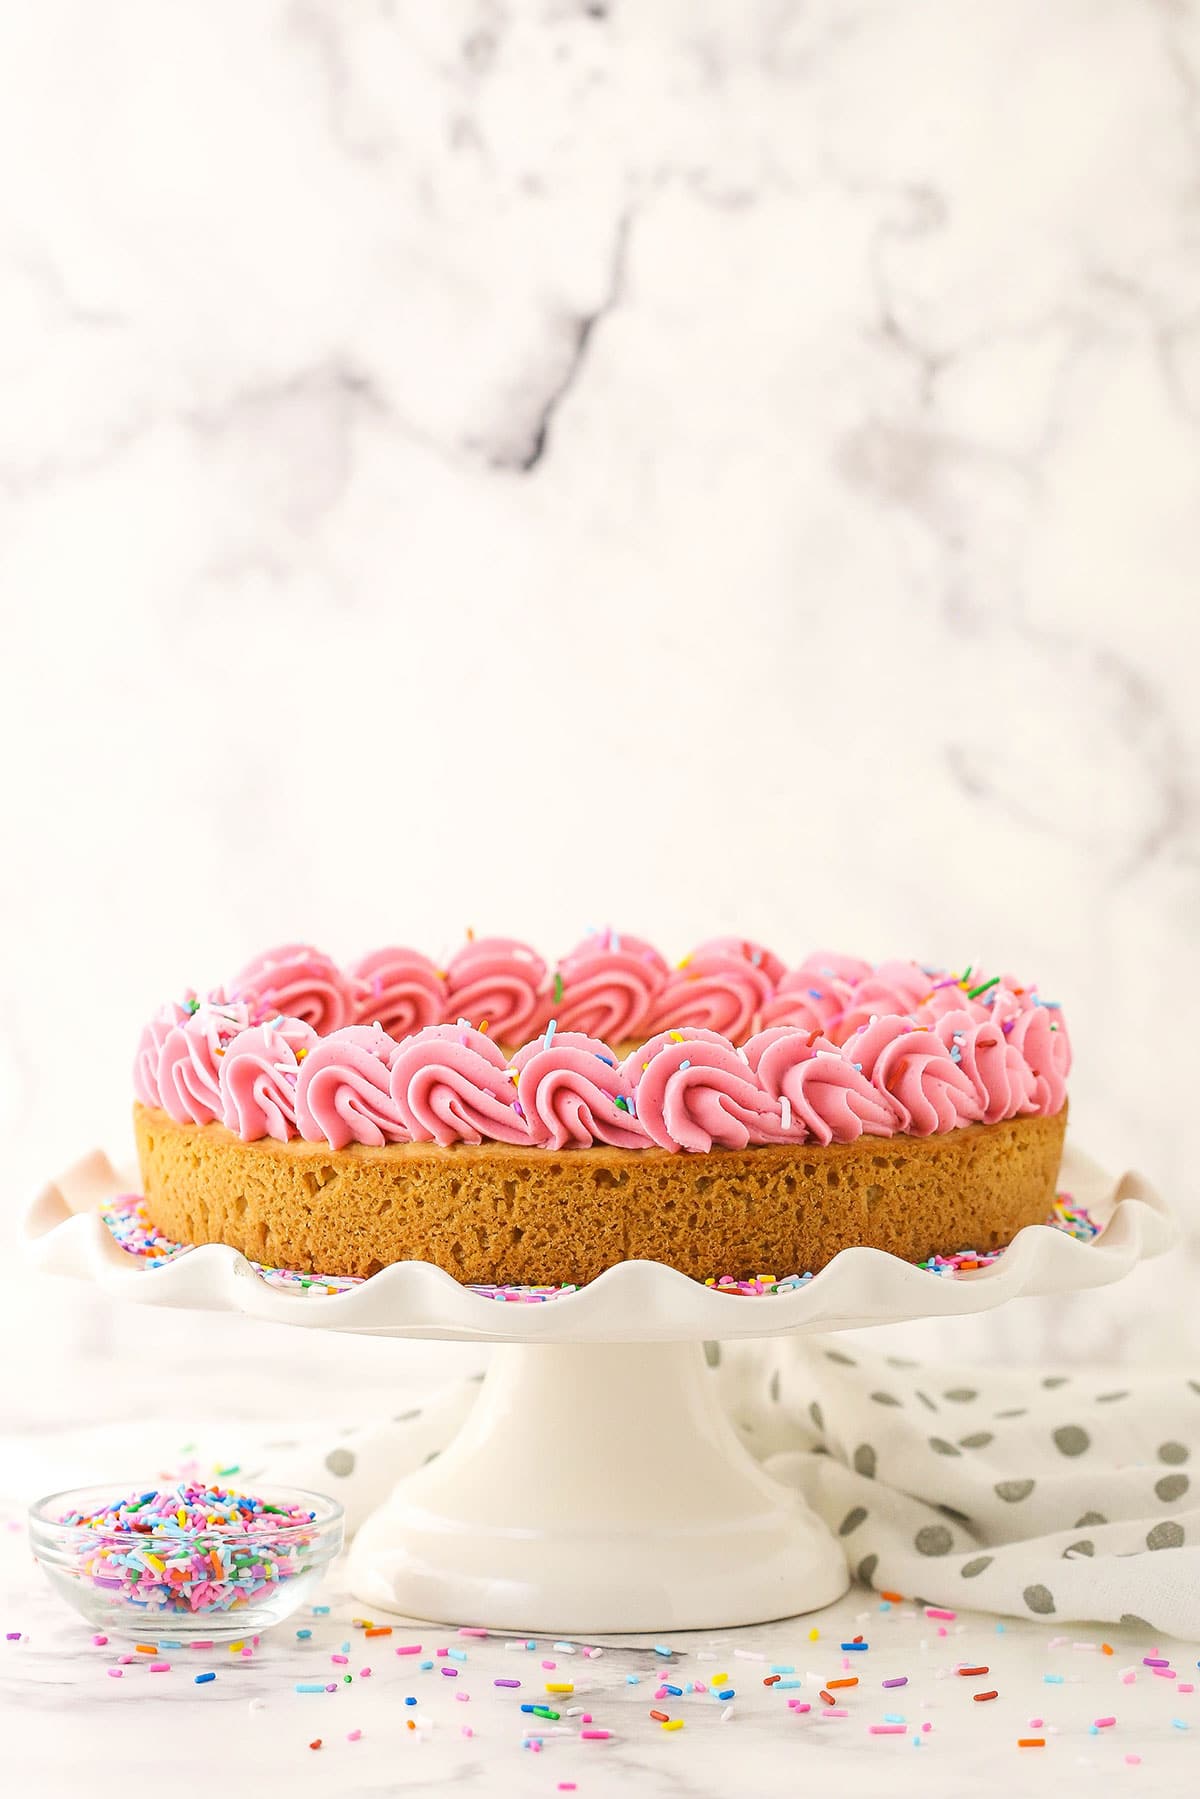 Side view of a cookie cake topped with piped pink frosting, on a white cake plate.